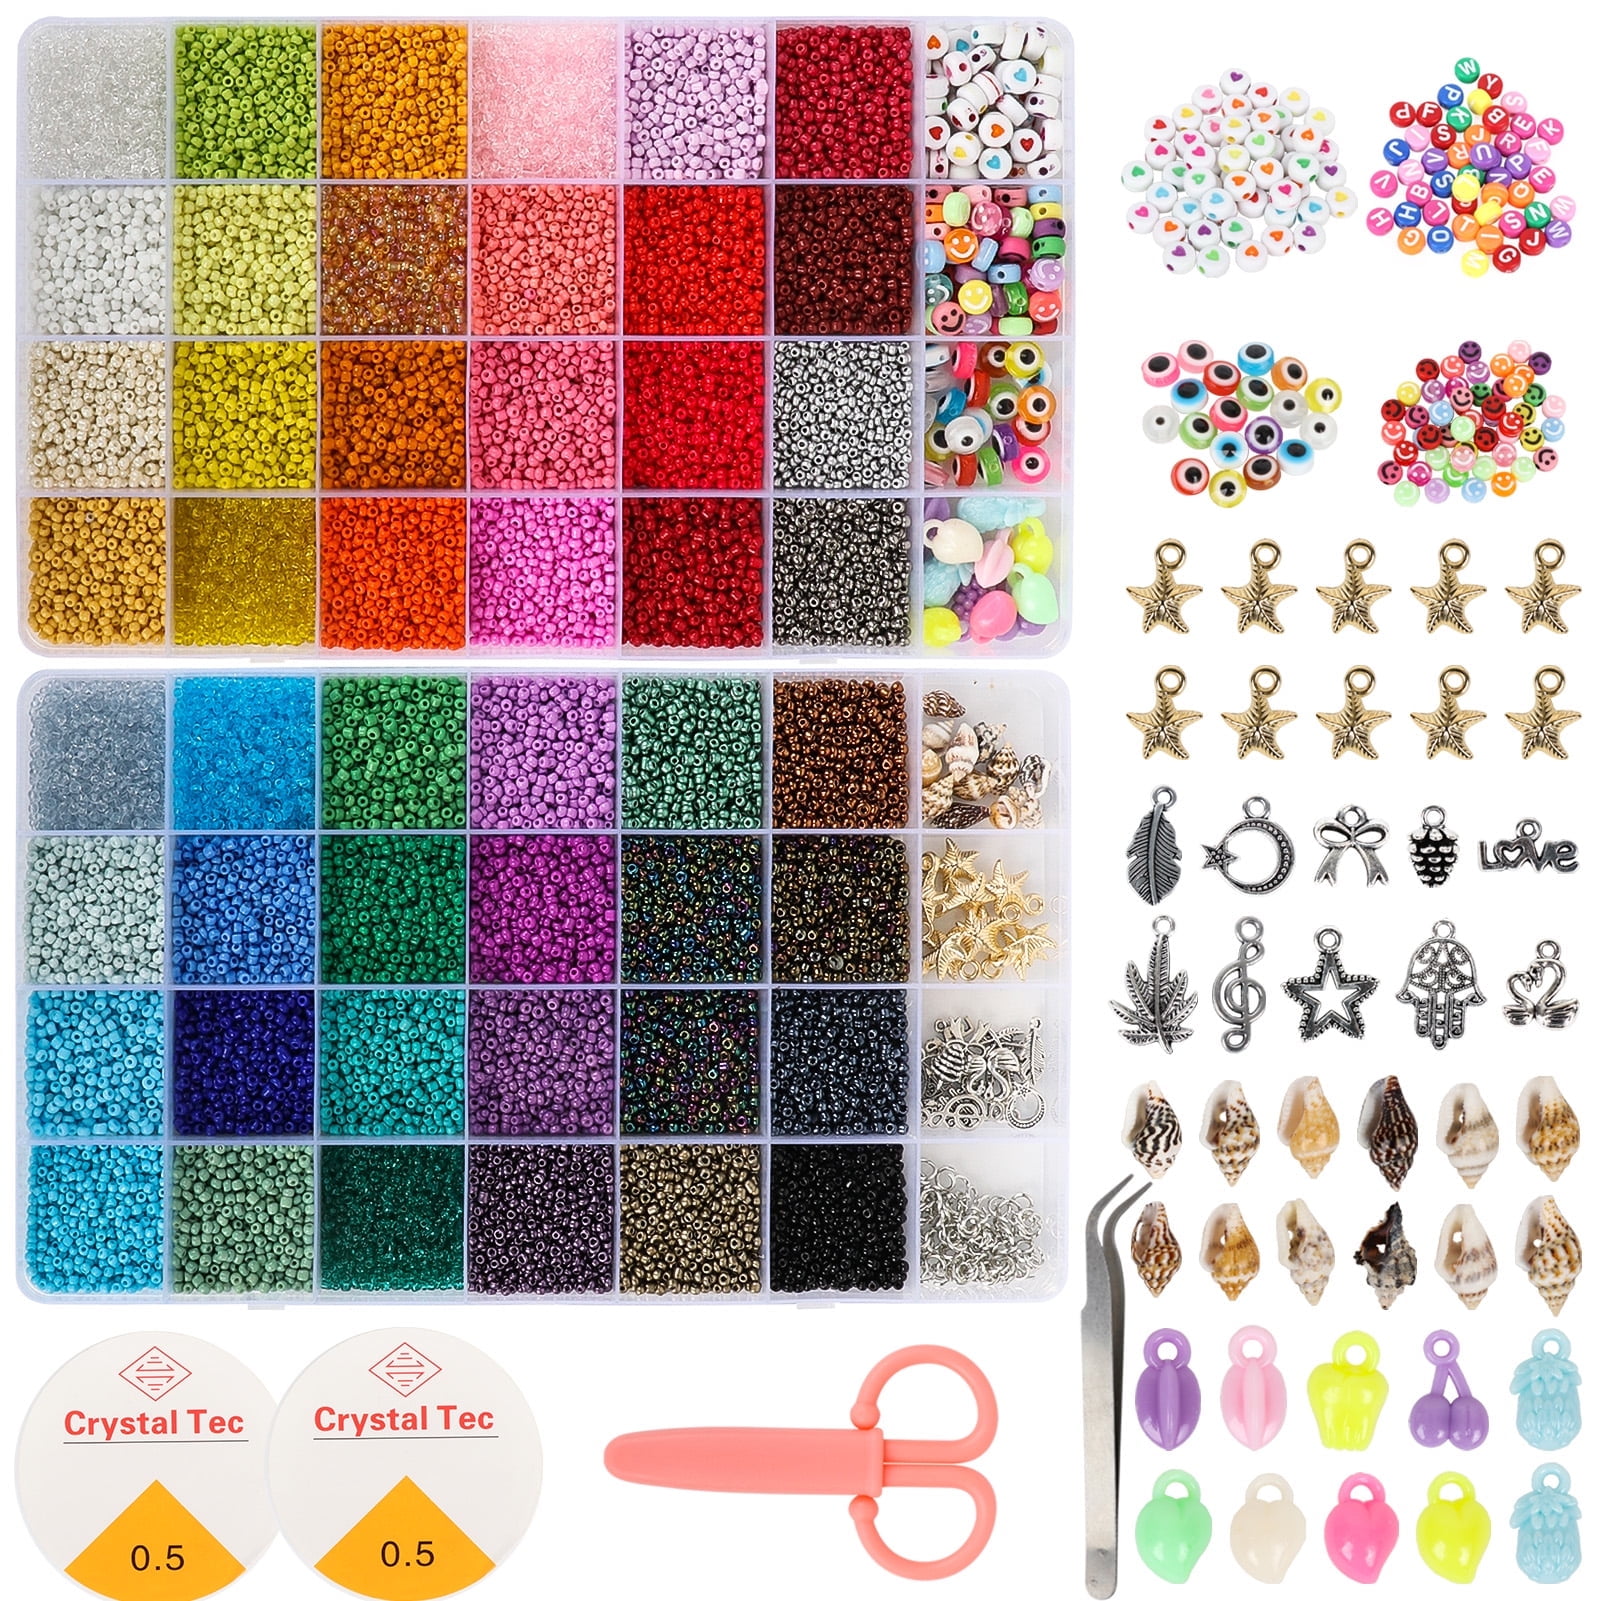 Nowsruiver Size 3mm 8/0 Seed Beads 24 Colors Total About 12000pcs Craft Beads for Making Jewelry, Ro623104